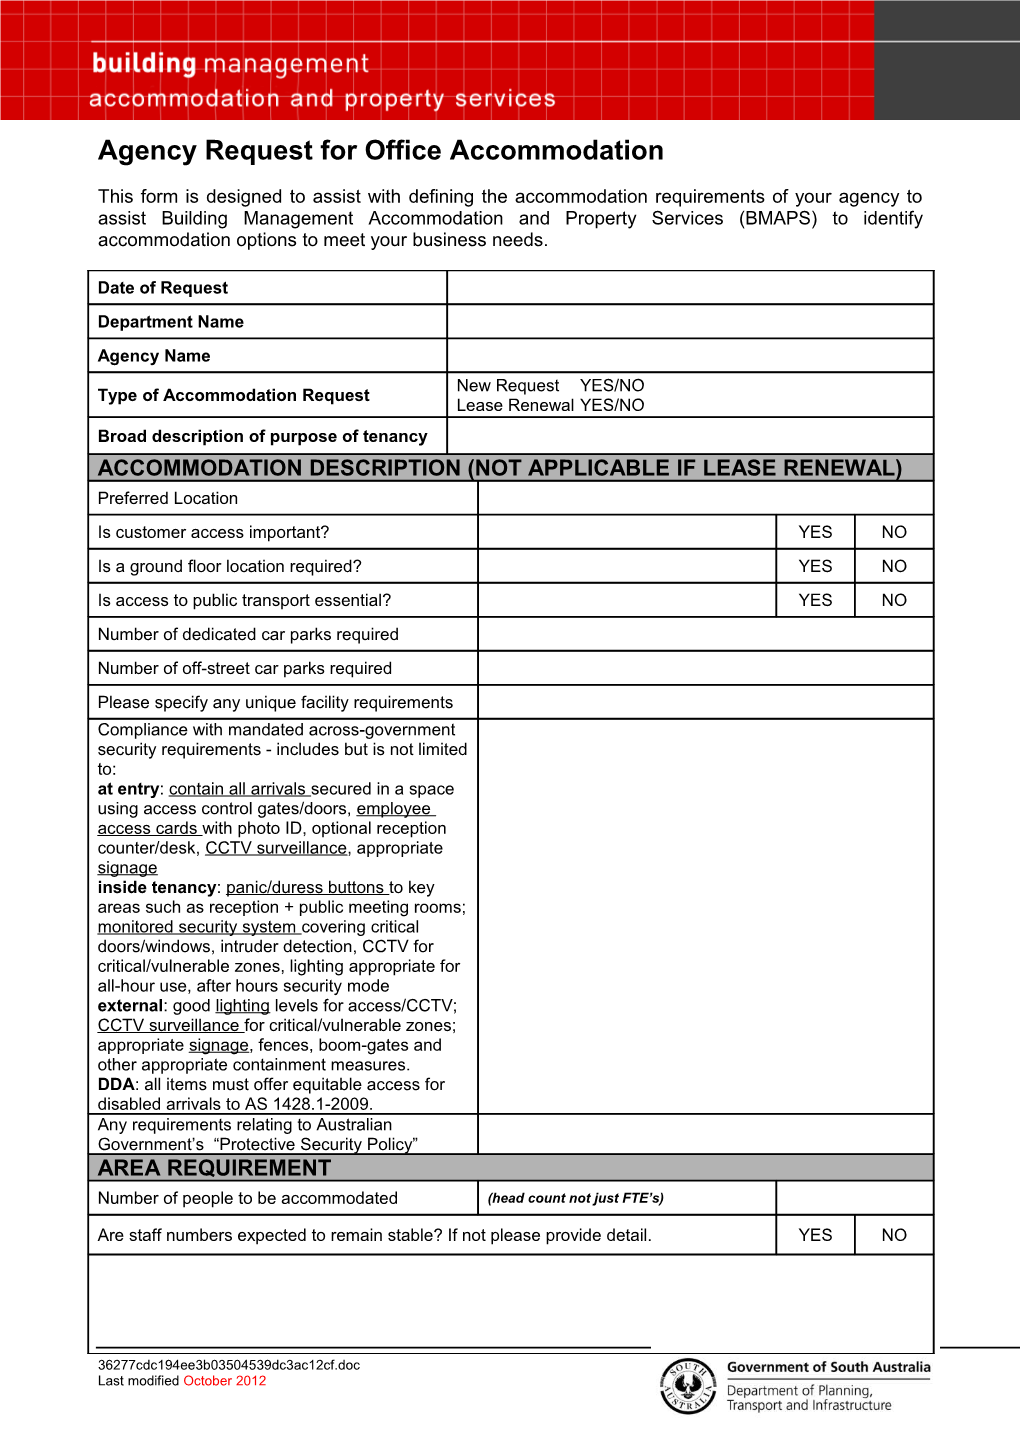 Agency Request for New Accommodation Form - DOC